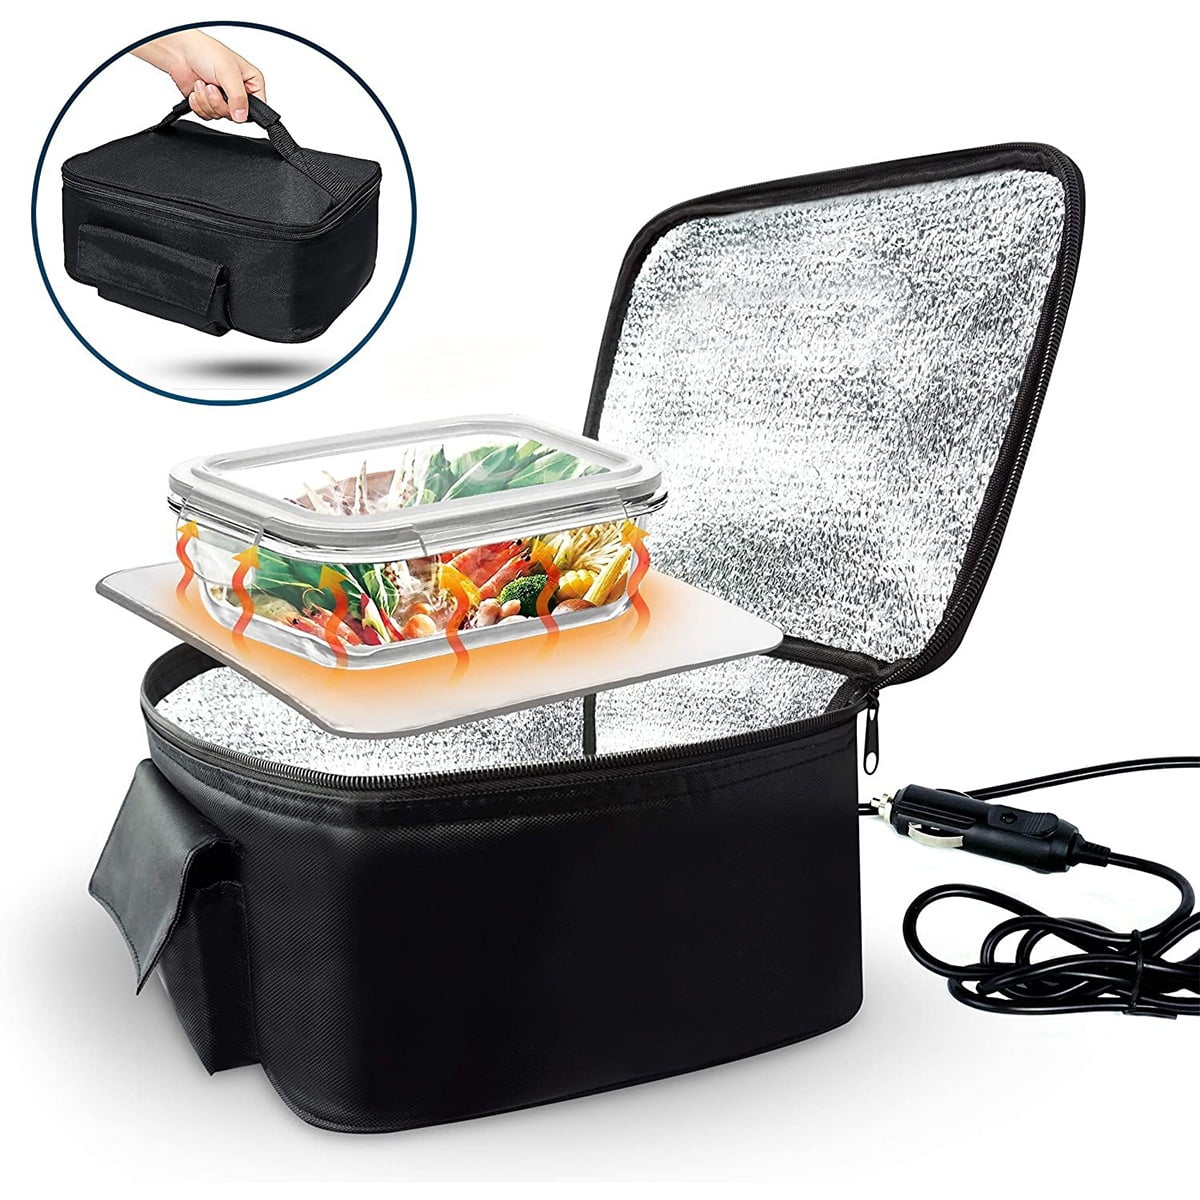 Lunch Box Stove 12V Car Hot Food Meal Warmer Heated Bag Electric Oven Camping 